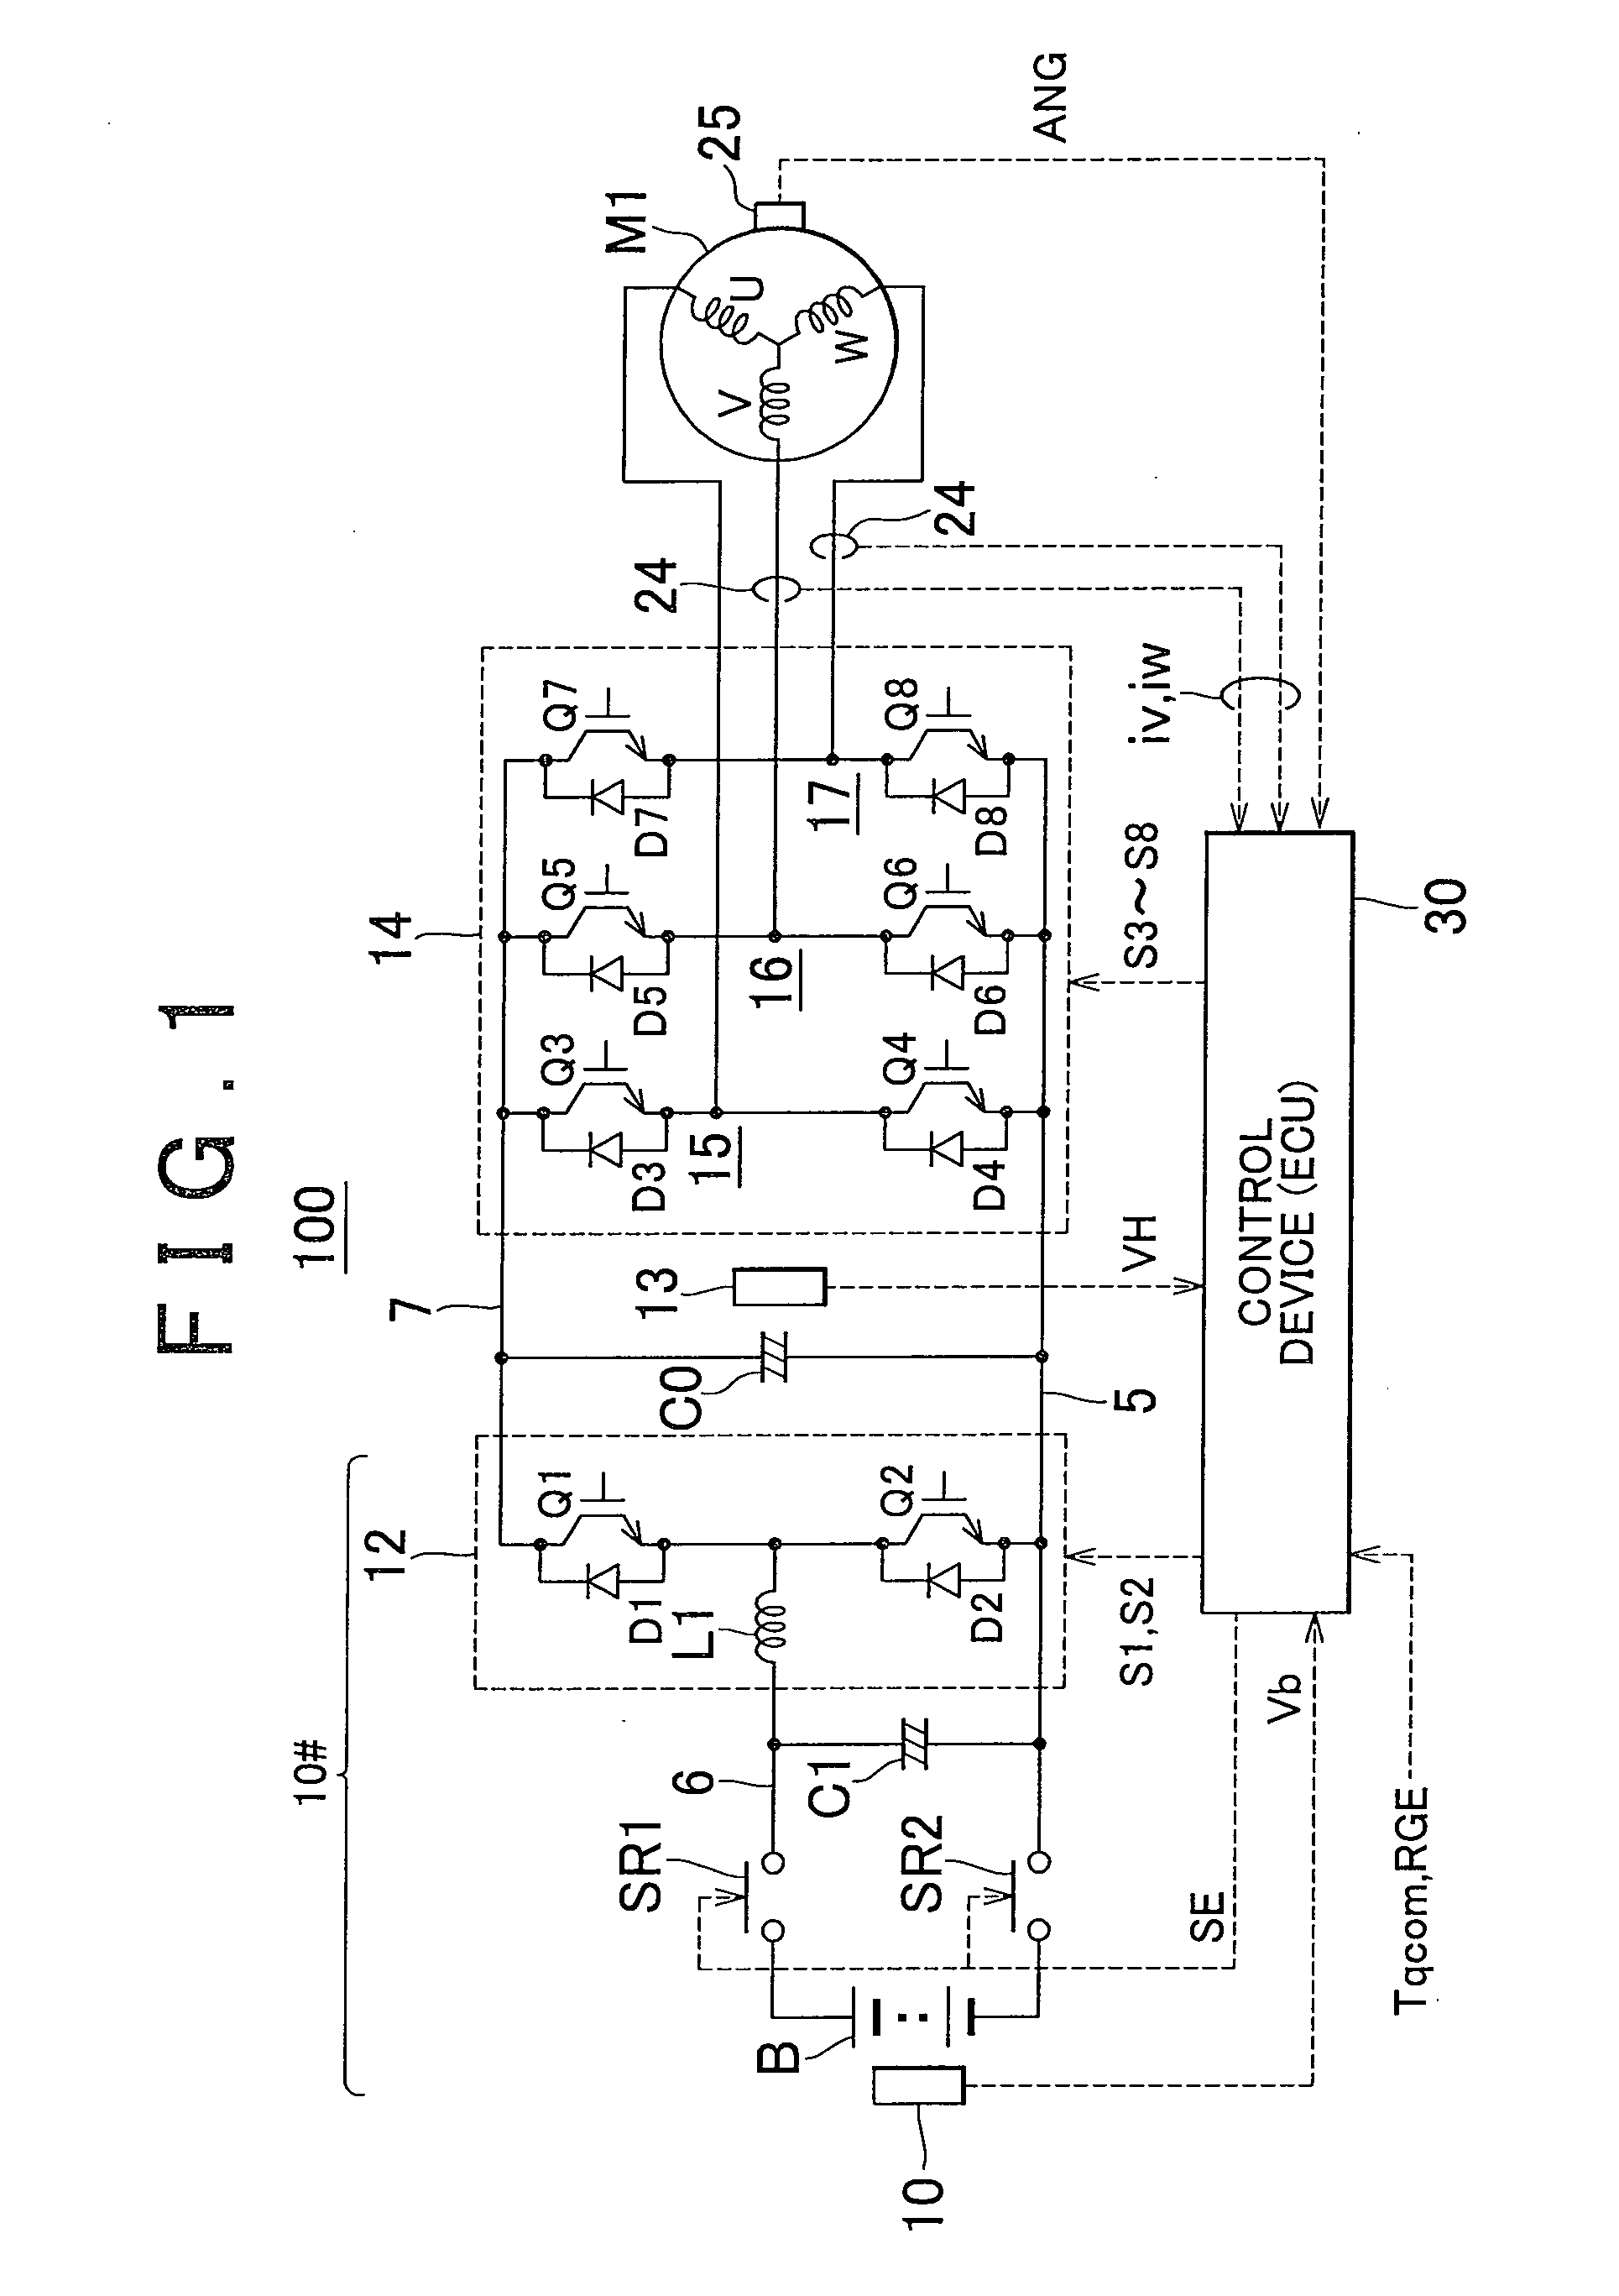 Control system for ac motor